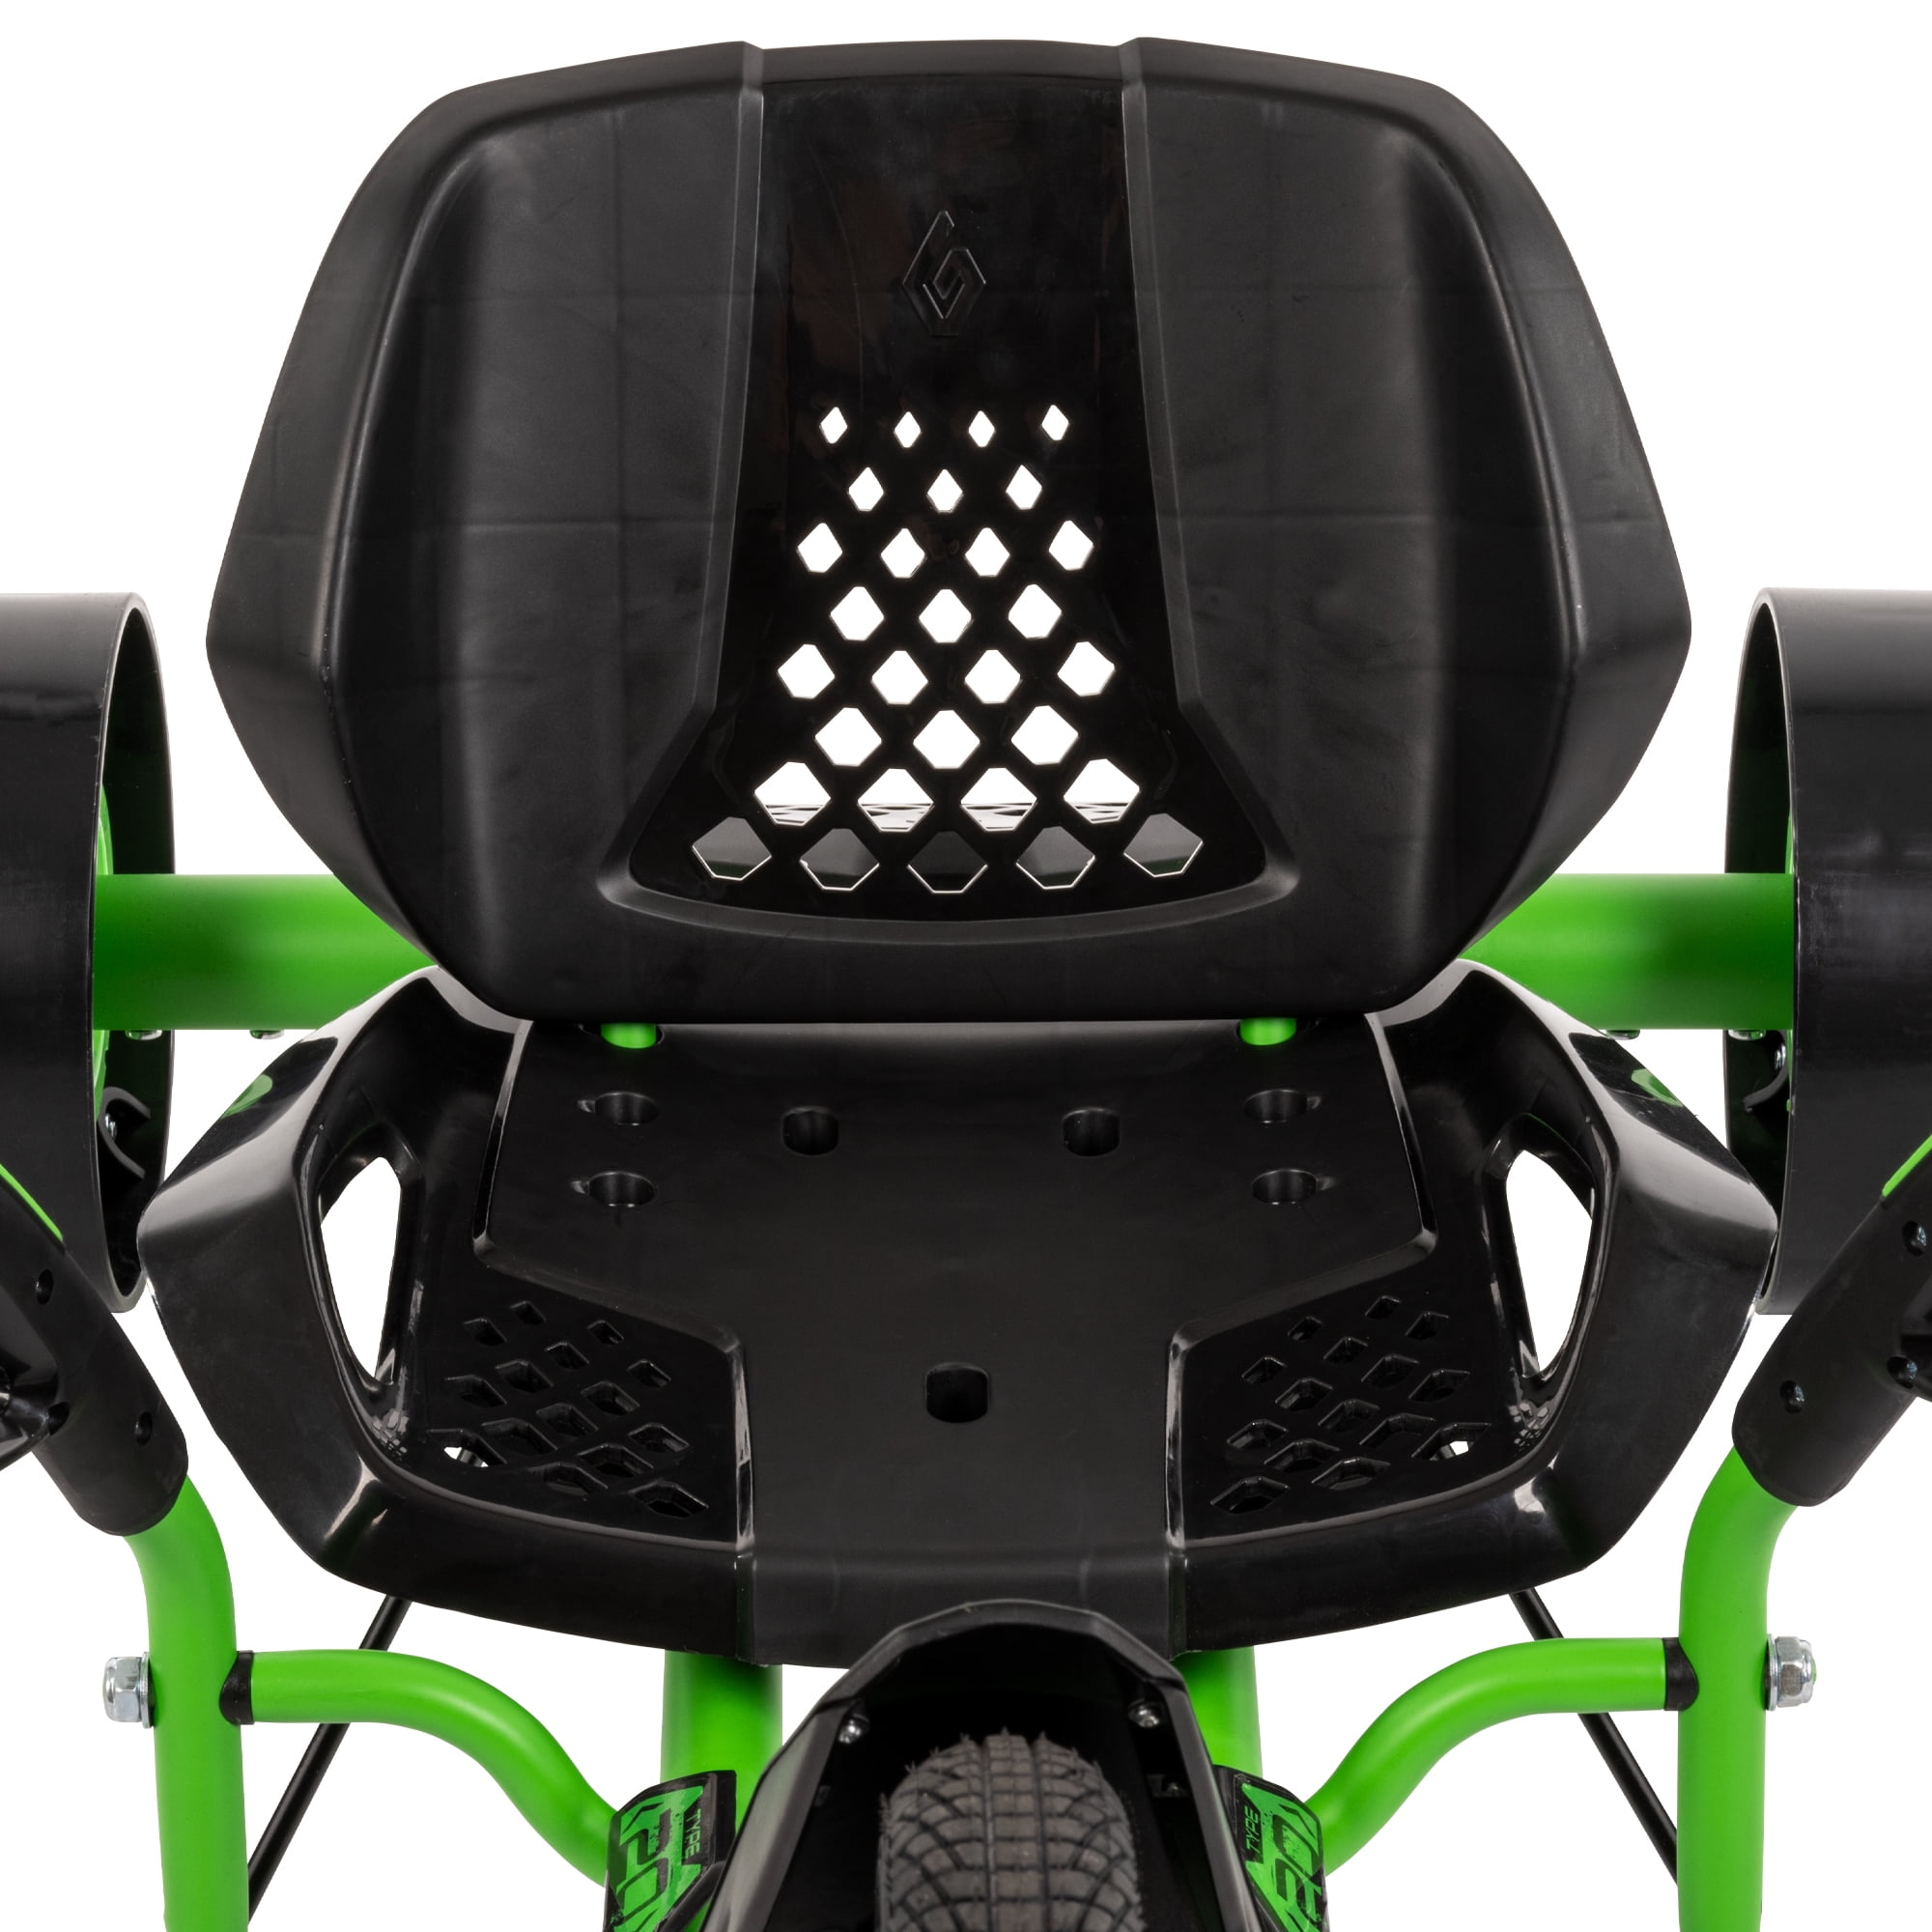 Drift and power slide with Huffy's $99 Electric Green Machine Ride-On Trike  (Reg. $230)